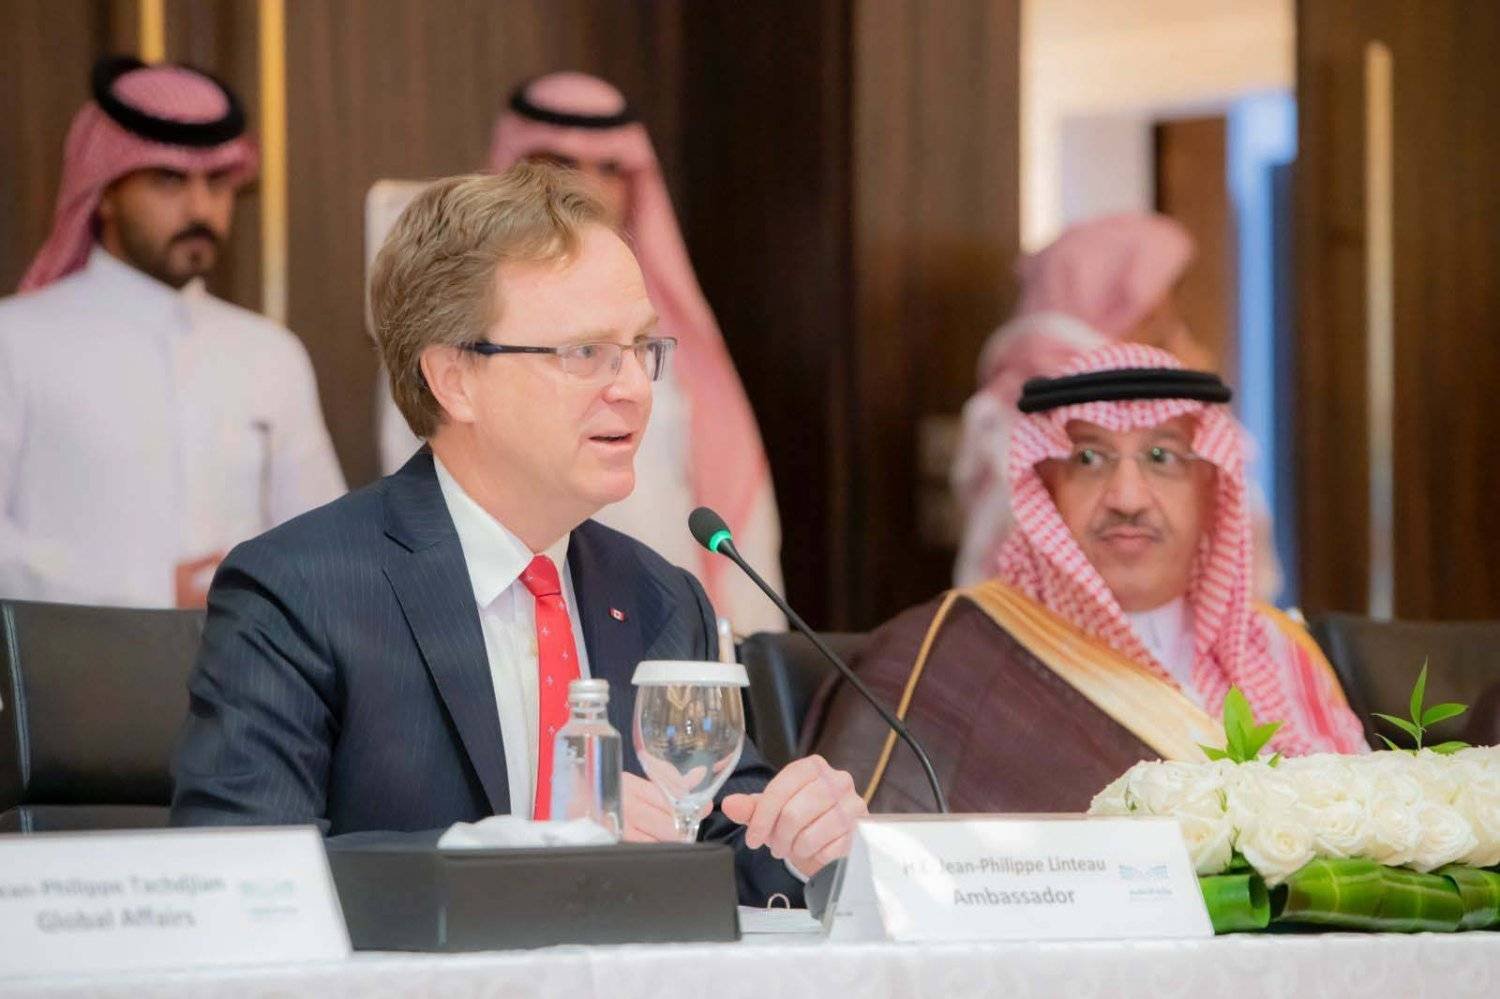 The Canadian ambassador said his country is working in partnership with Saudi Arabia to strengthen relations in the educational fields. (Asharq Al-Awsat) 